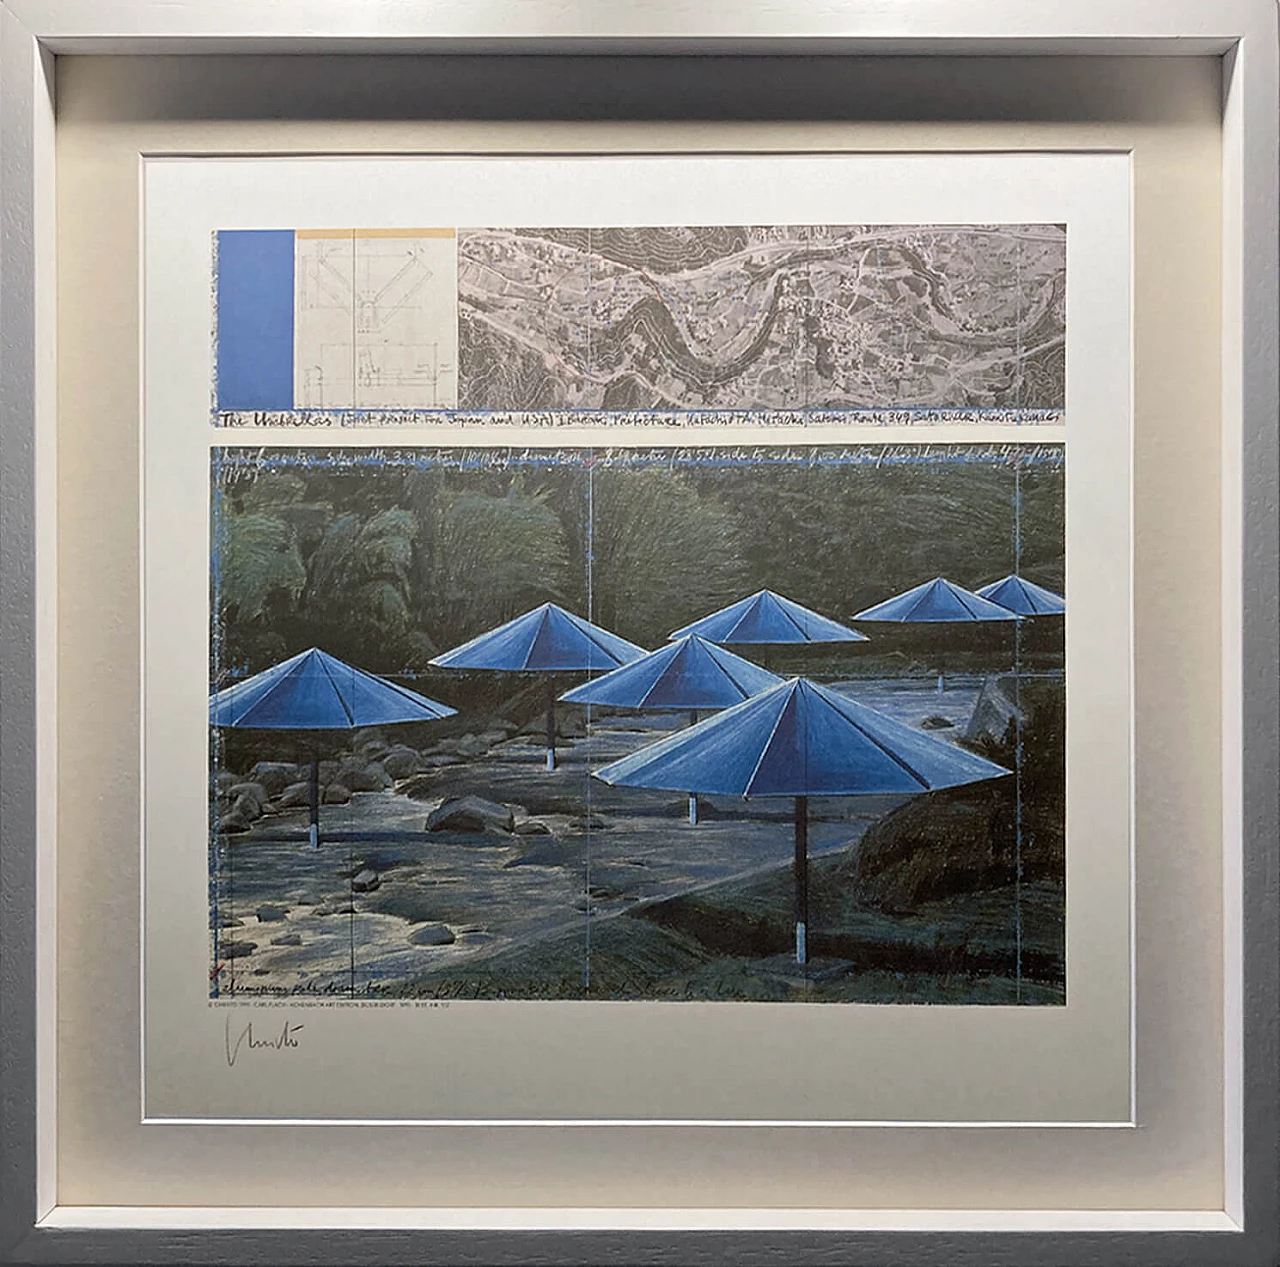 Christo, The Umbrellas - Joint Project for Japan and USA, litografia, 1991 25